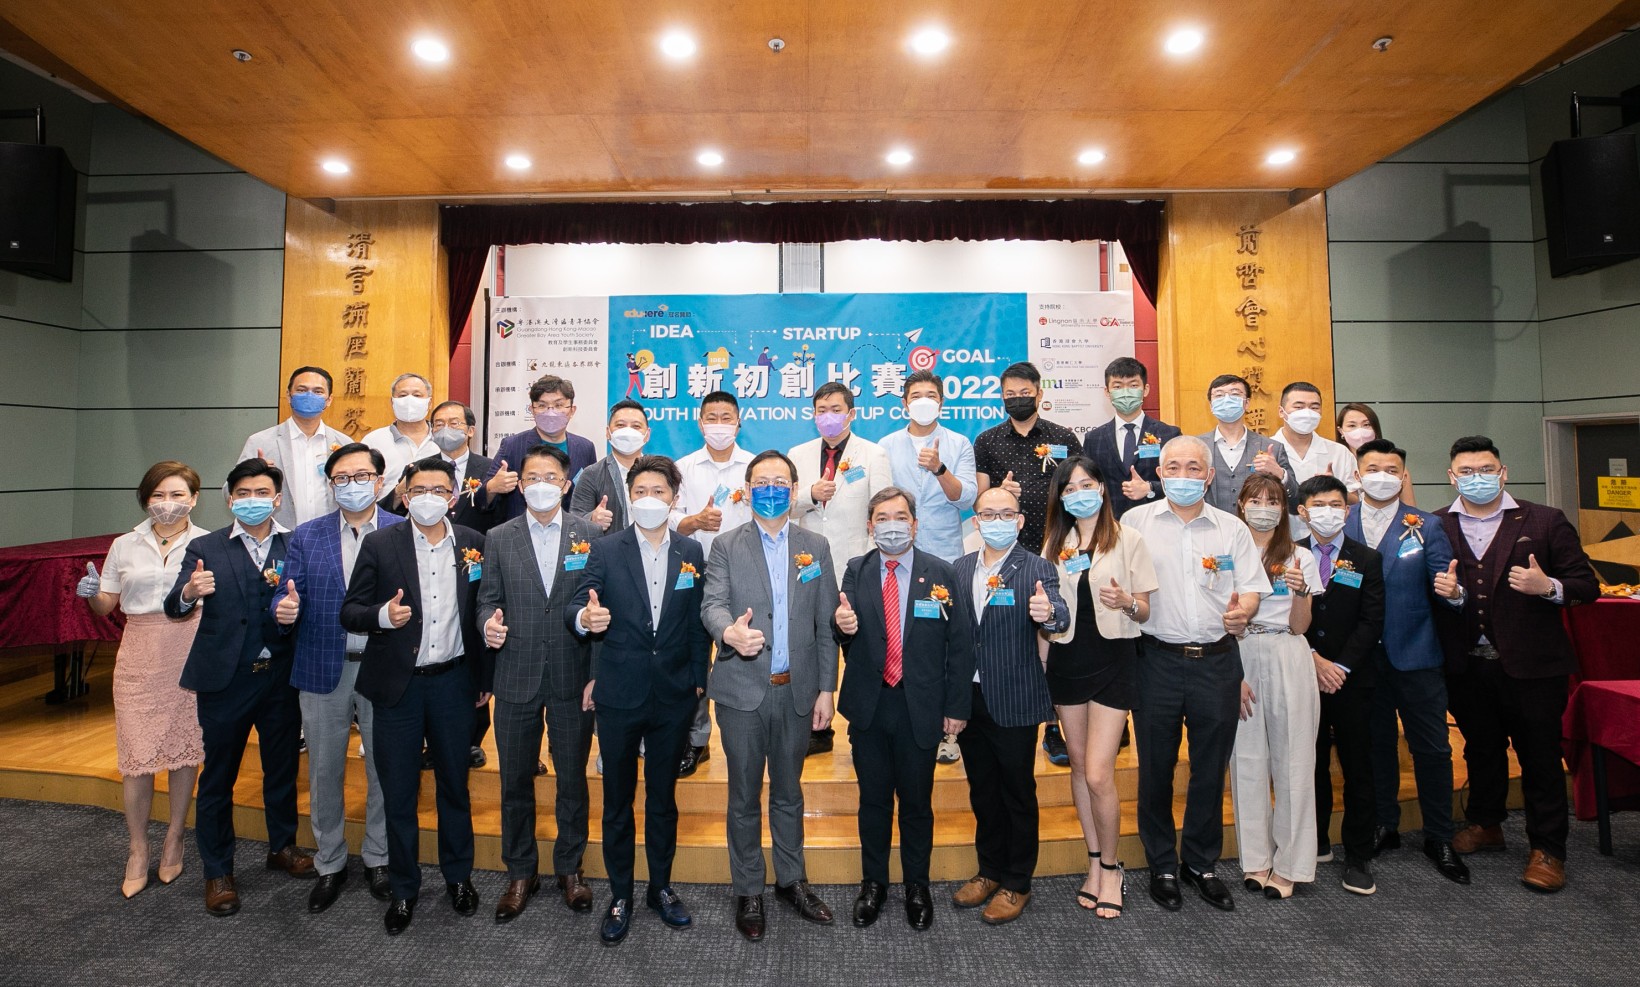 Lingnan University and the Guangdong-Hong Kong-Macao Greater Bay Area Youth Society co-host the  Opening Ceremony for the Youth Innovation Start-up Competition.